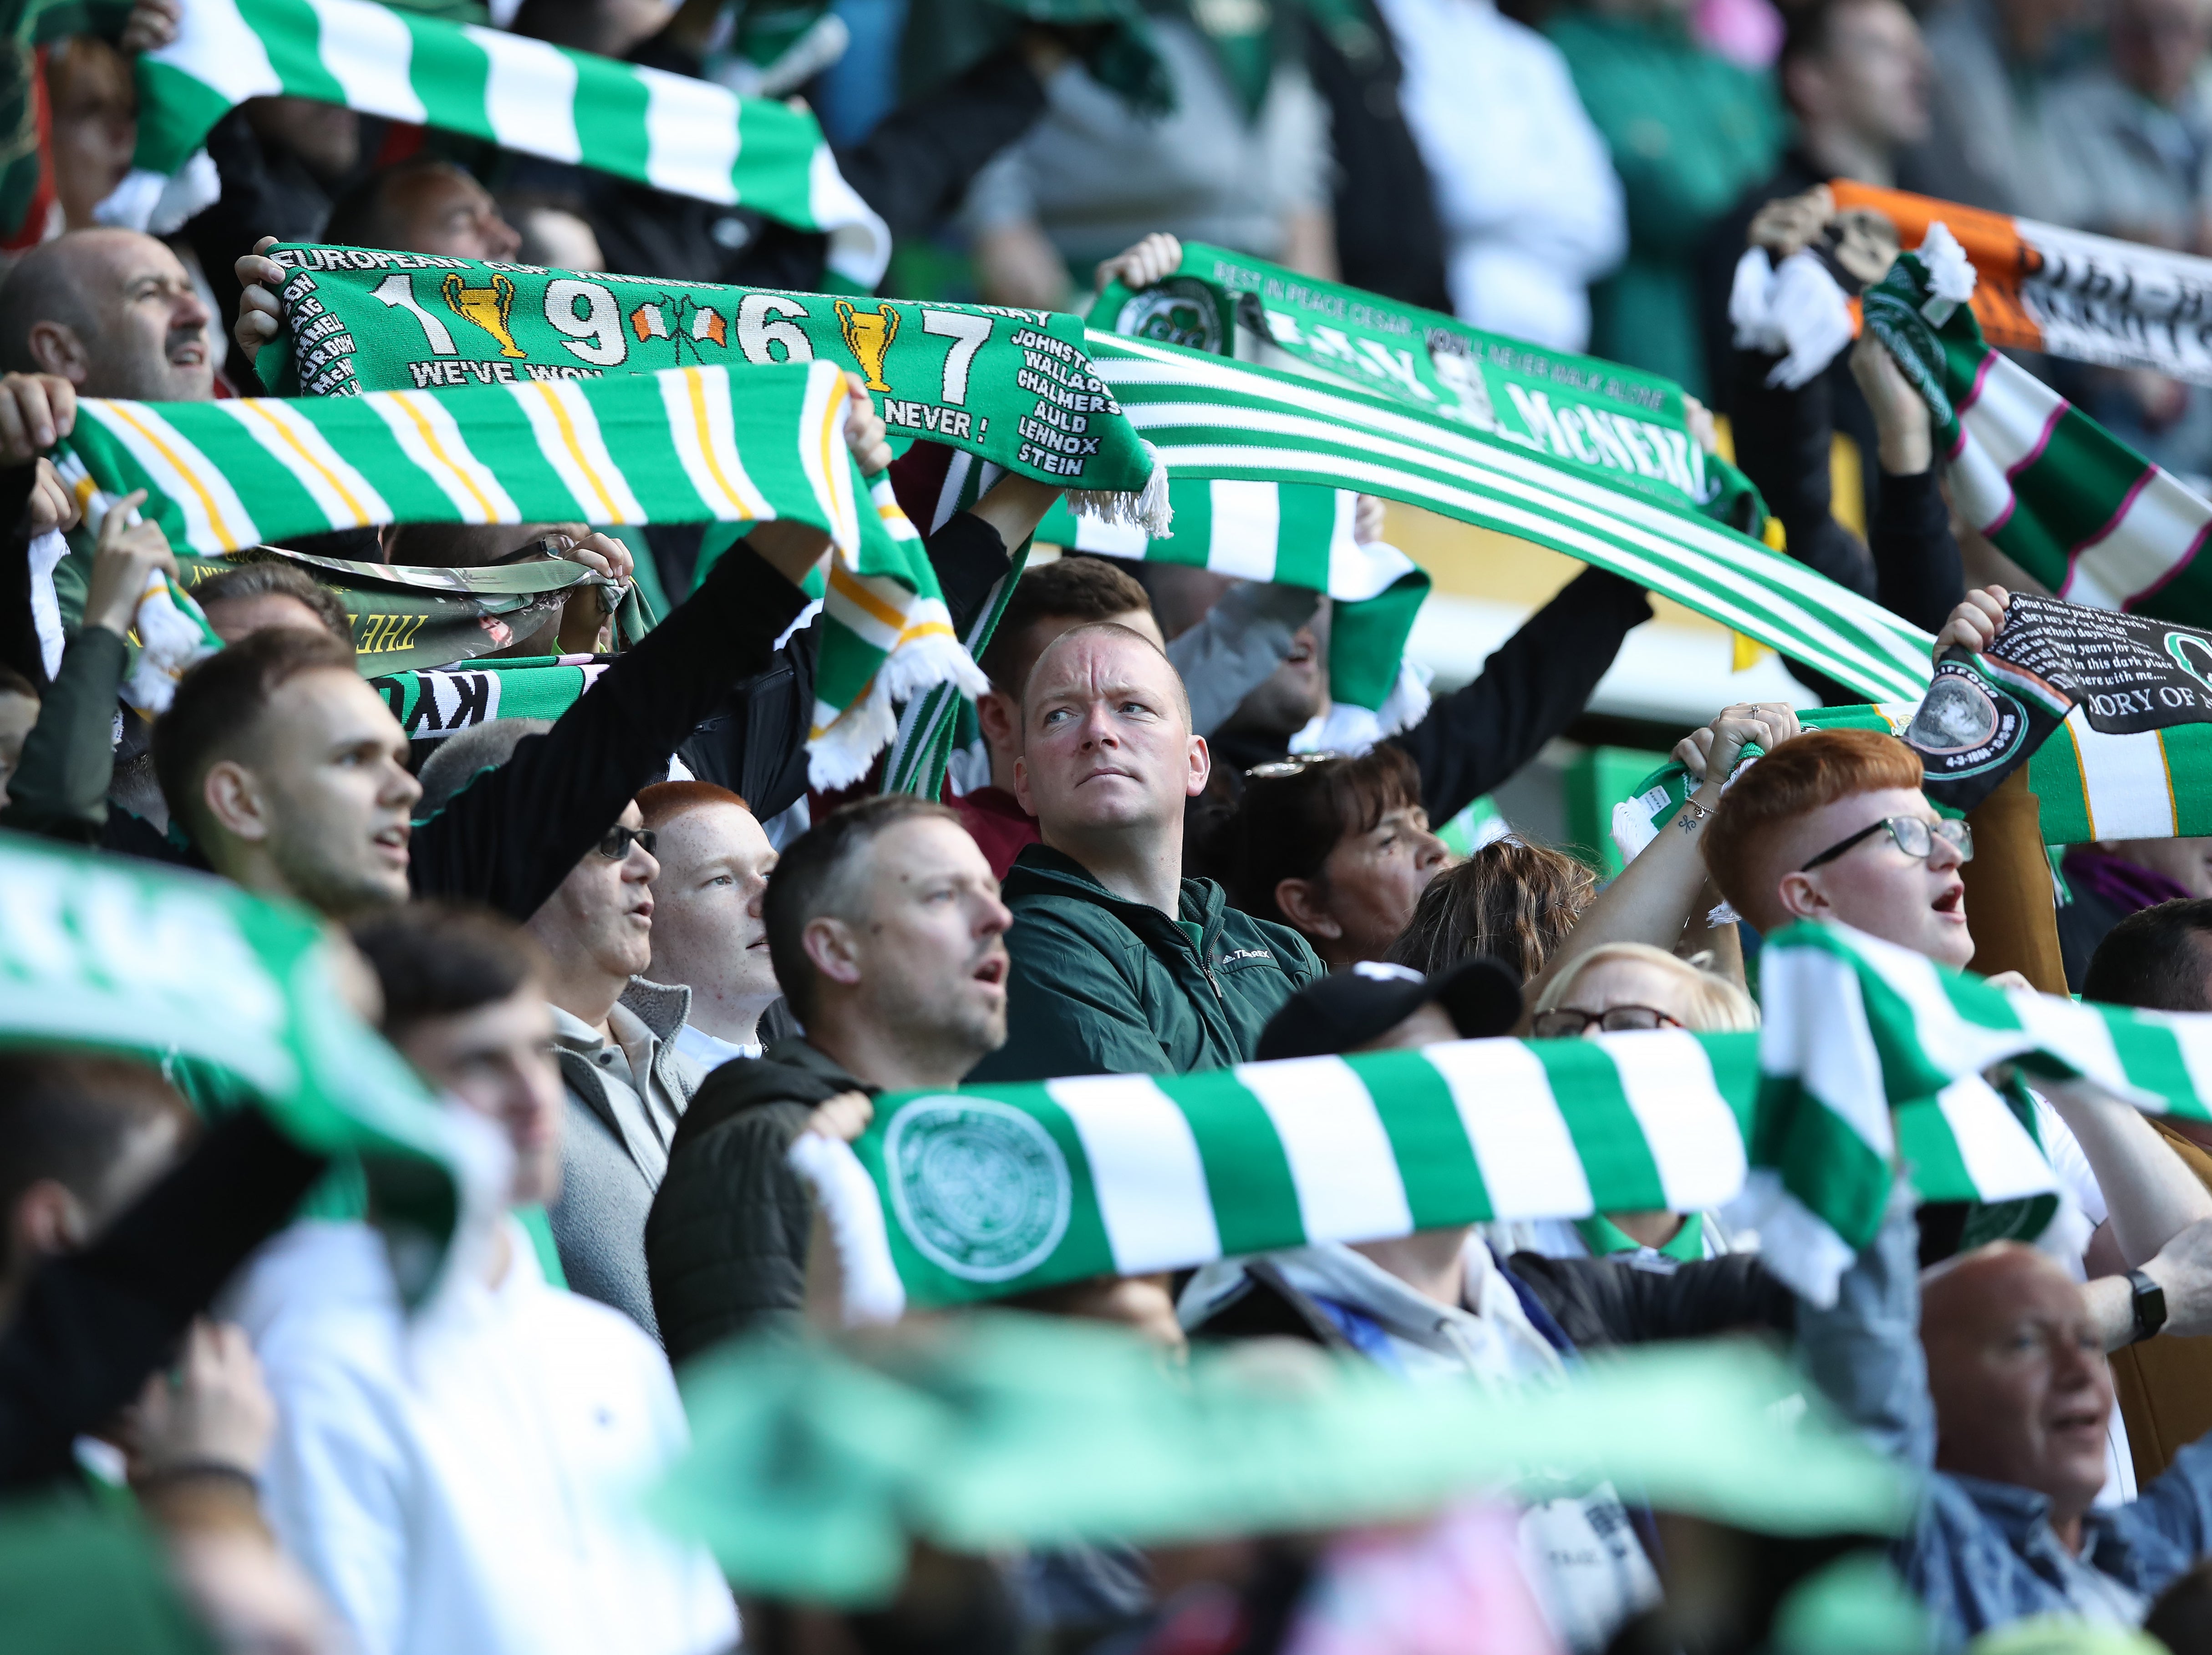 Celtic fans watch on in support of their team